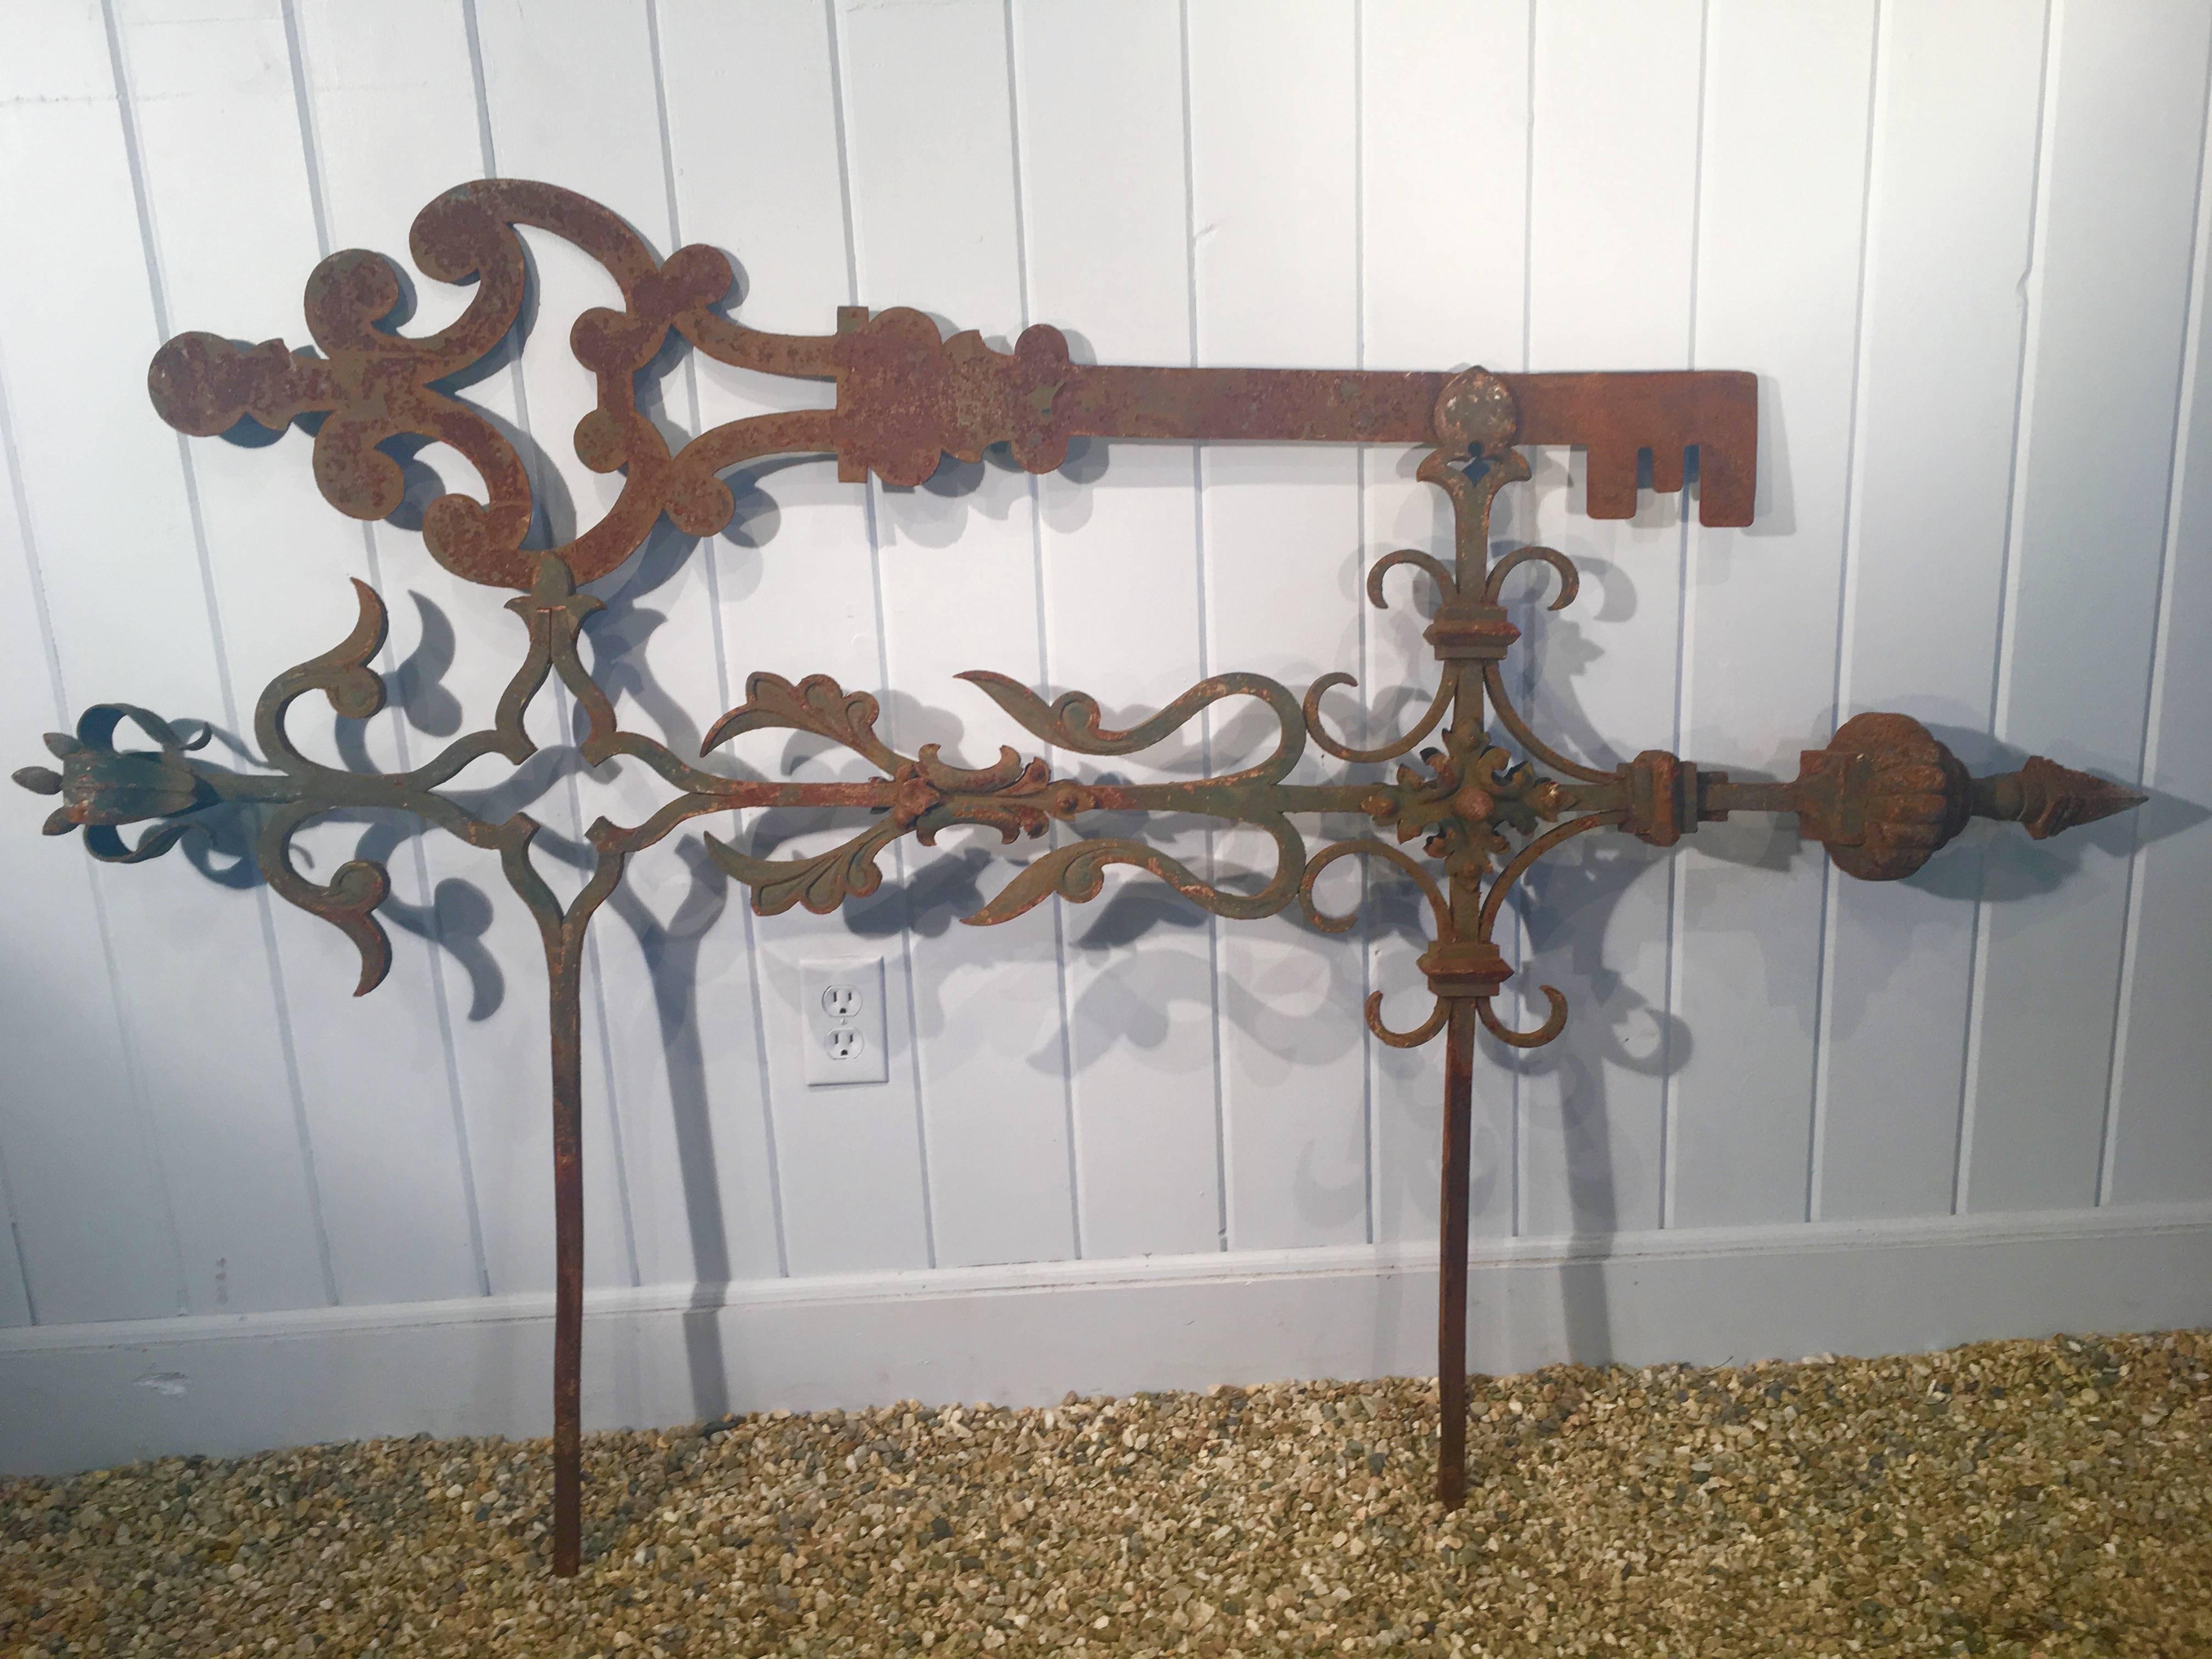 Now here is a piece you don't find every day! This late 18th-early 19th century wrought iron trade sign once hung outside a key maker's shop, embedded into the stone walls with the two long horizontal arms. It has an outstanding patina with remnants